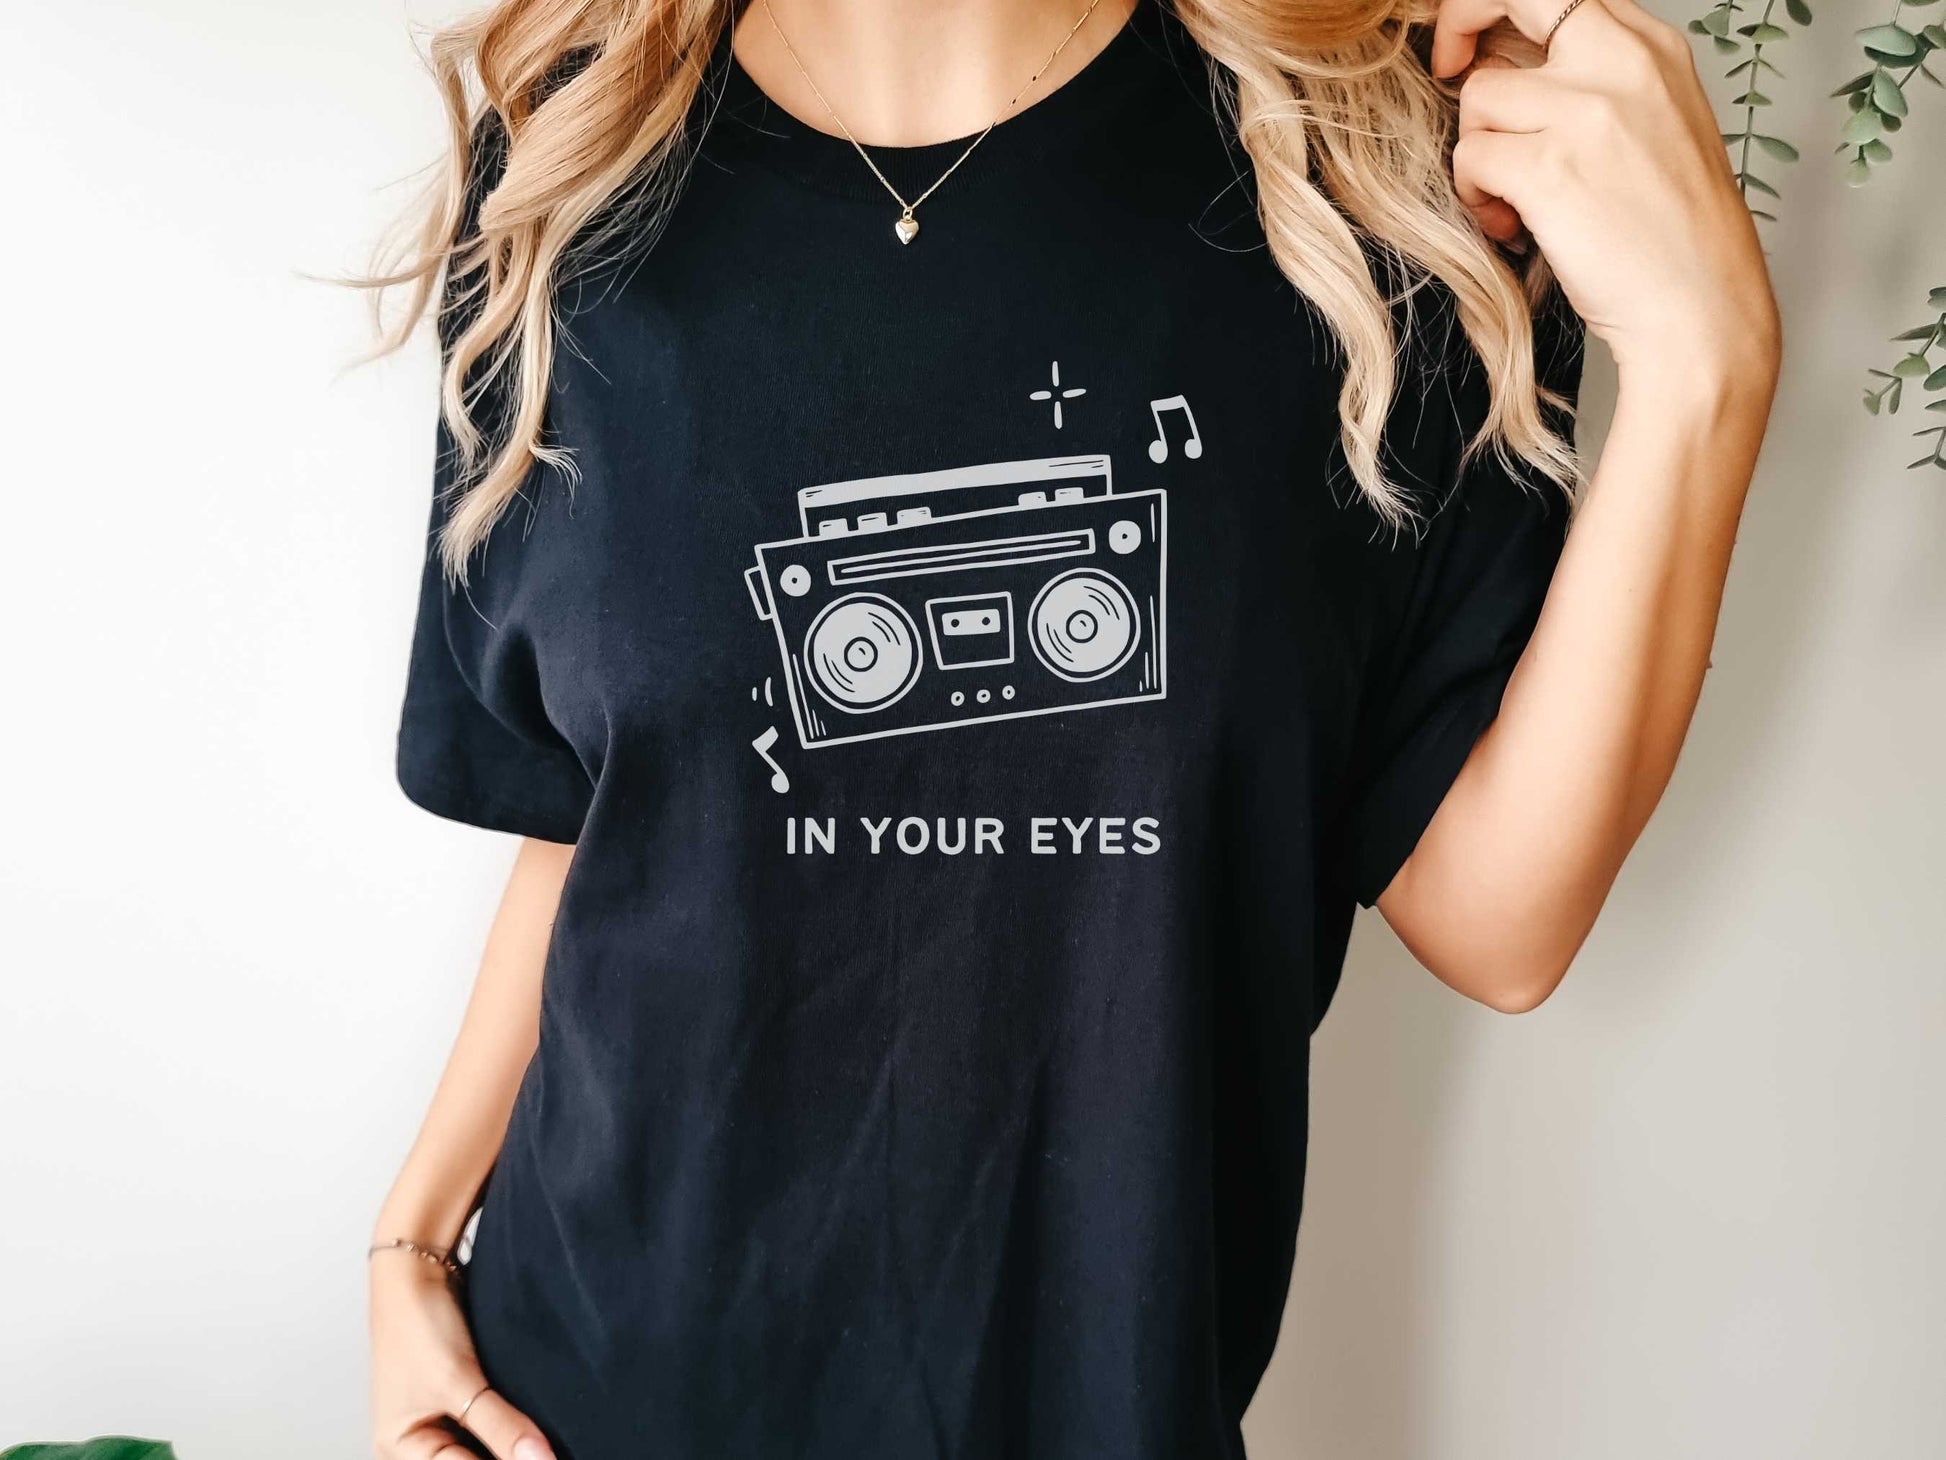 Say Anything T-Shirt in Black